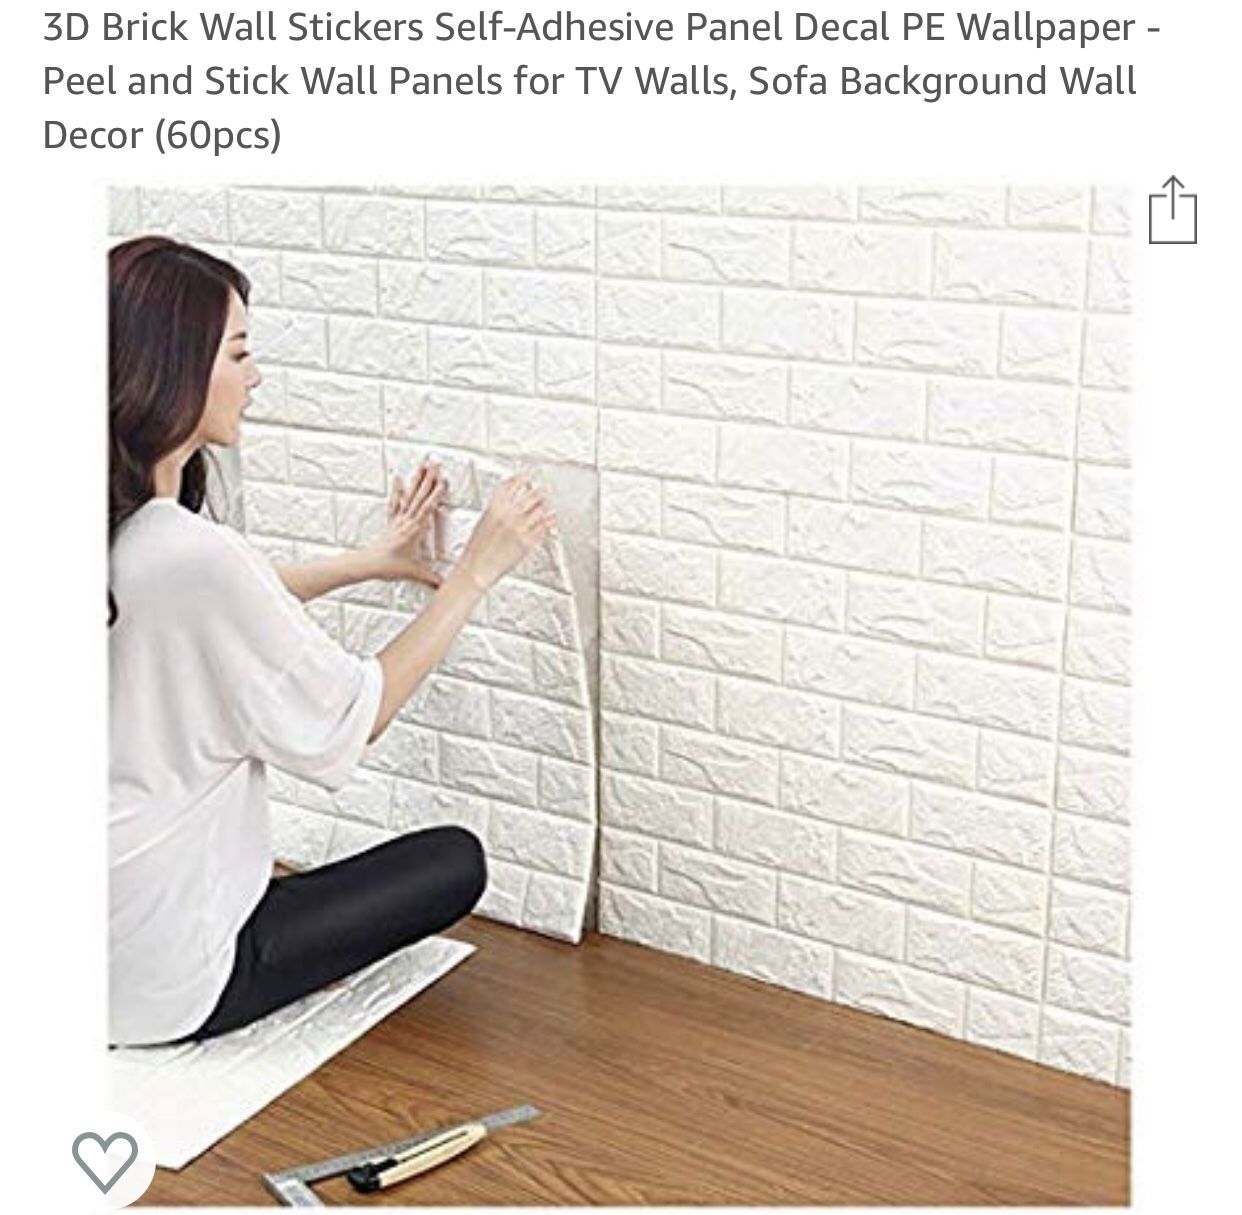 46 Pieces- 3D Brick Wall Stickers Self-Adhesive Panel Decal PE Wallpaper- Peel and Stick Wall Panels for TV Walls, Sofa Background Wall Decor